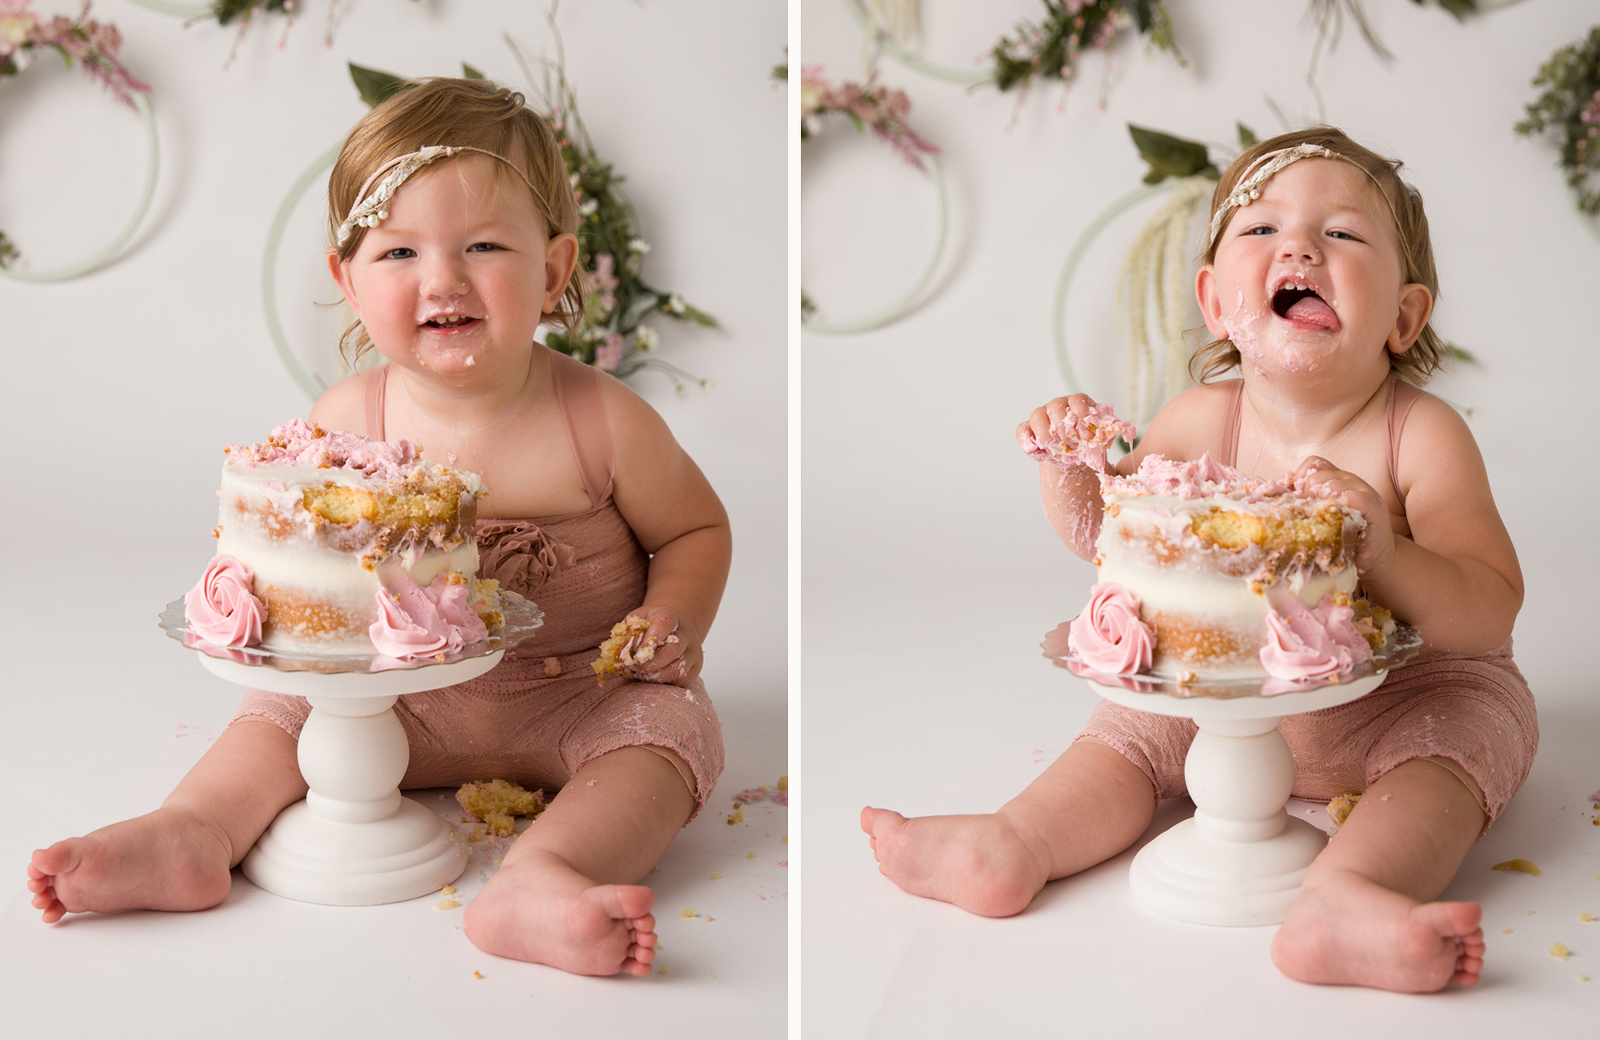 Studio cakesmash first birthday portrait session, the girl next to a fancy pastel pink cake. Before and after photos, with flowery rings in the background. Image by Helga Himer Photography, Sudbury, Ontario.